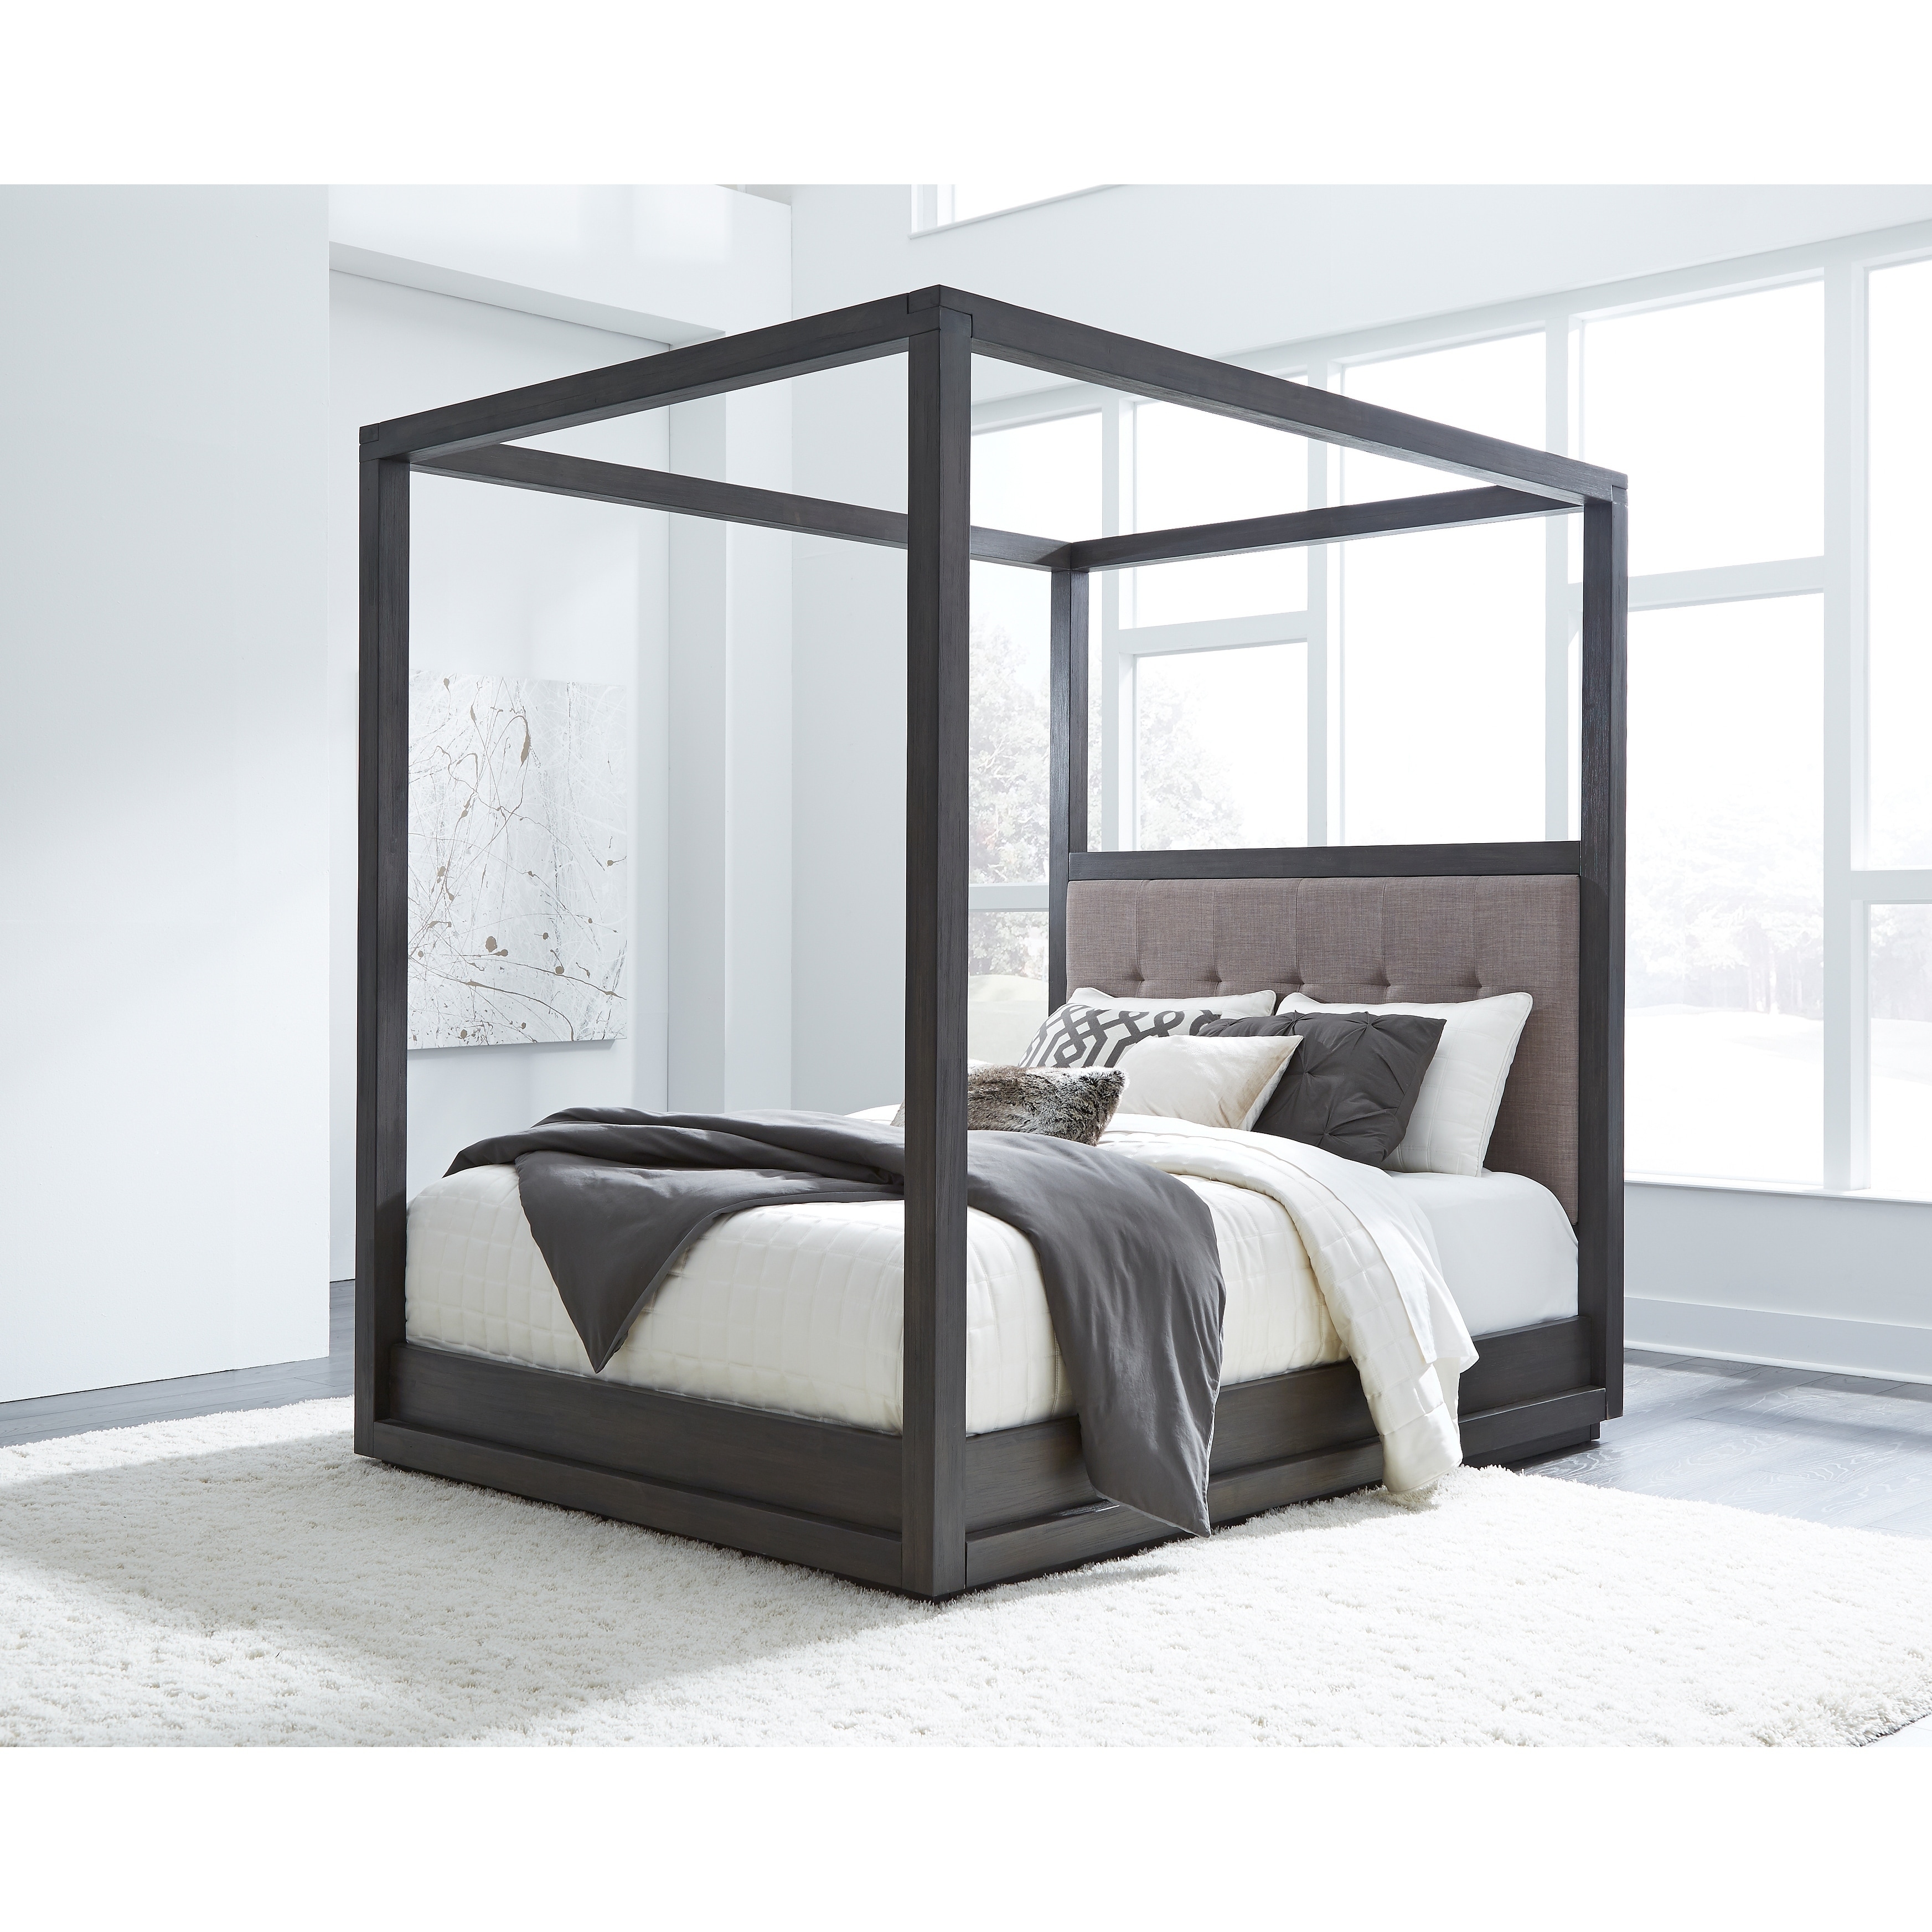 Carbon Loft Barron Full size Canopy Bed   Overstock   29908469